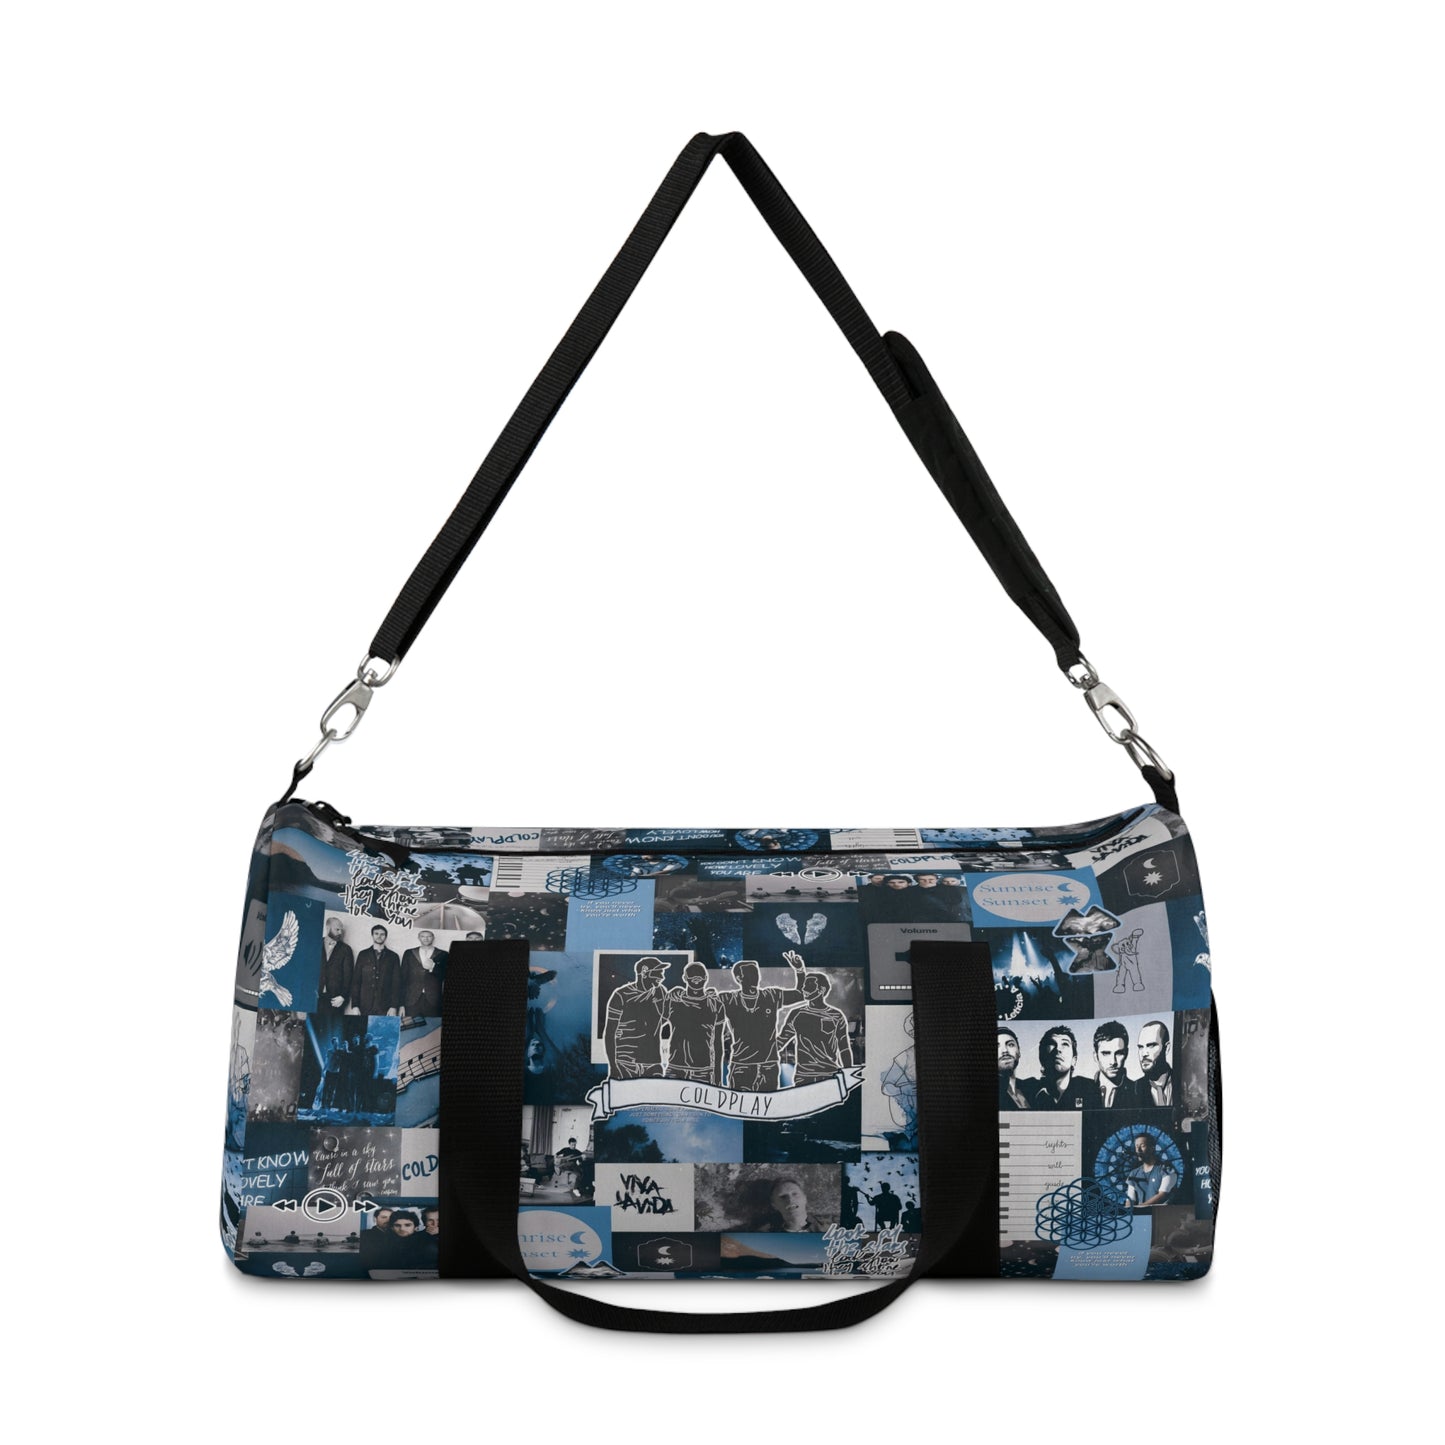 Coldplay Sunrise Sunset Collage Duffel Bag